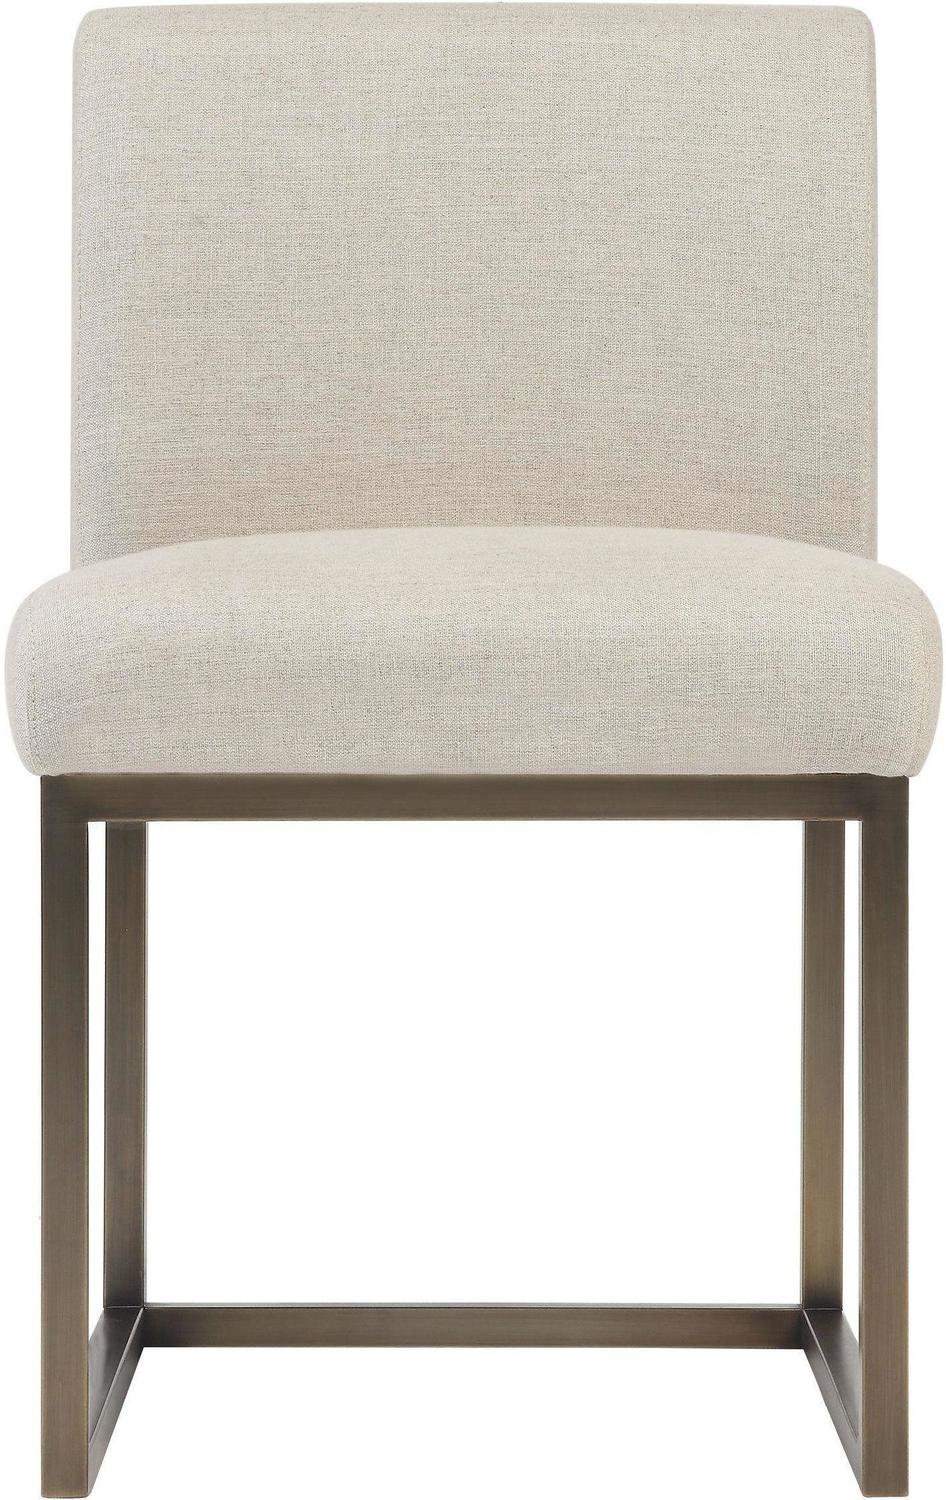 high end living room chairs Tov Furniture Dining Chairs Beige